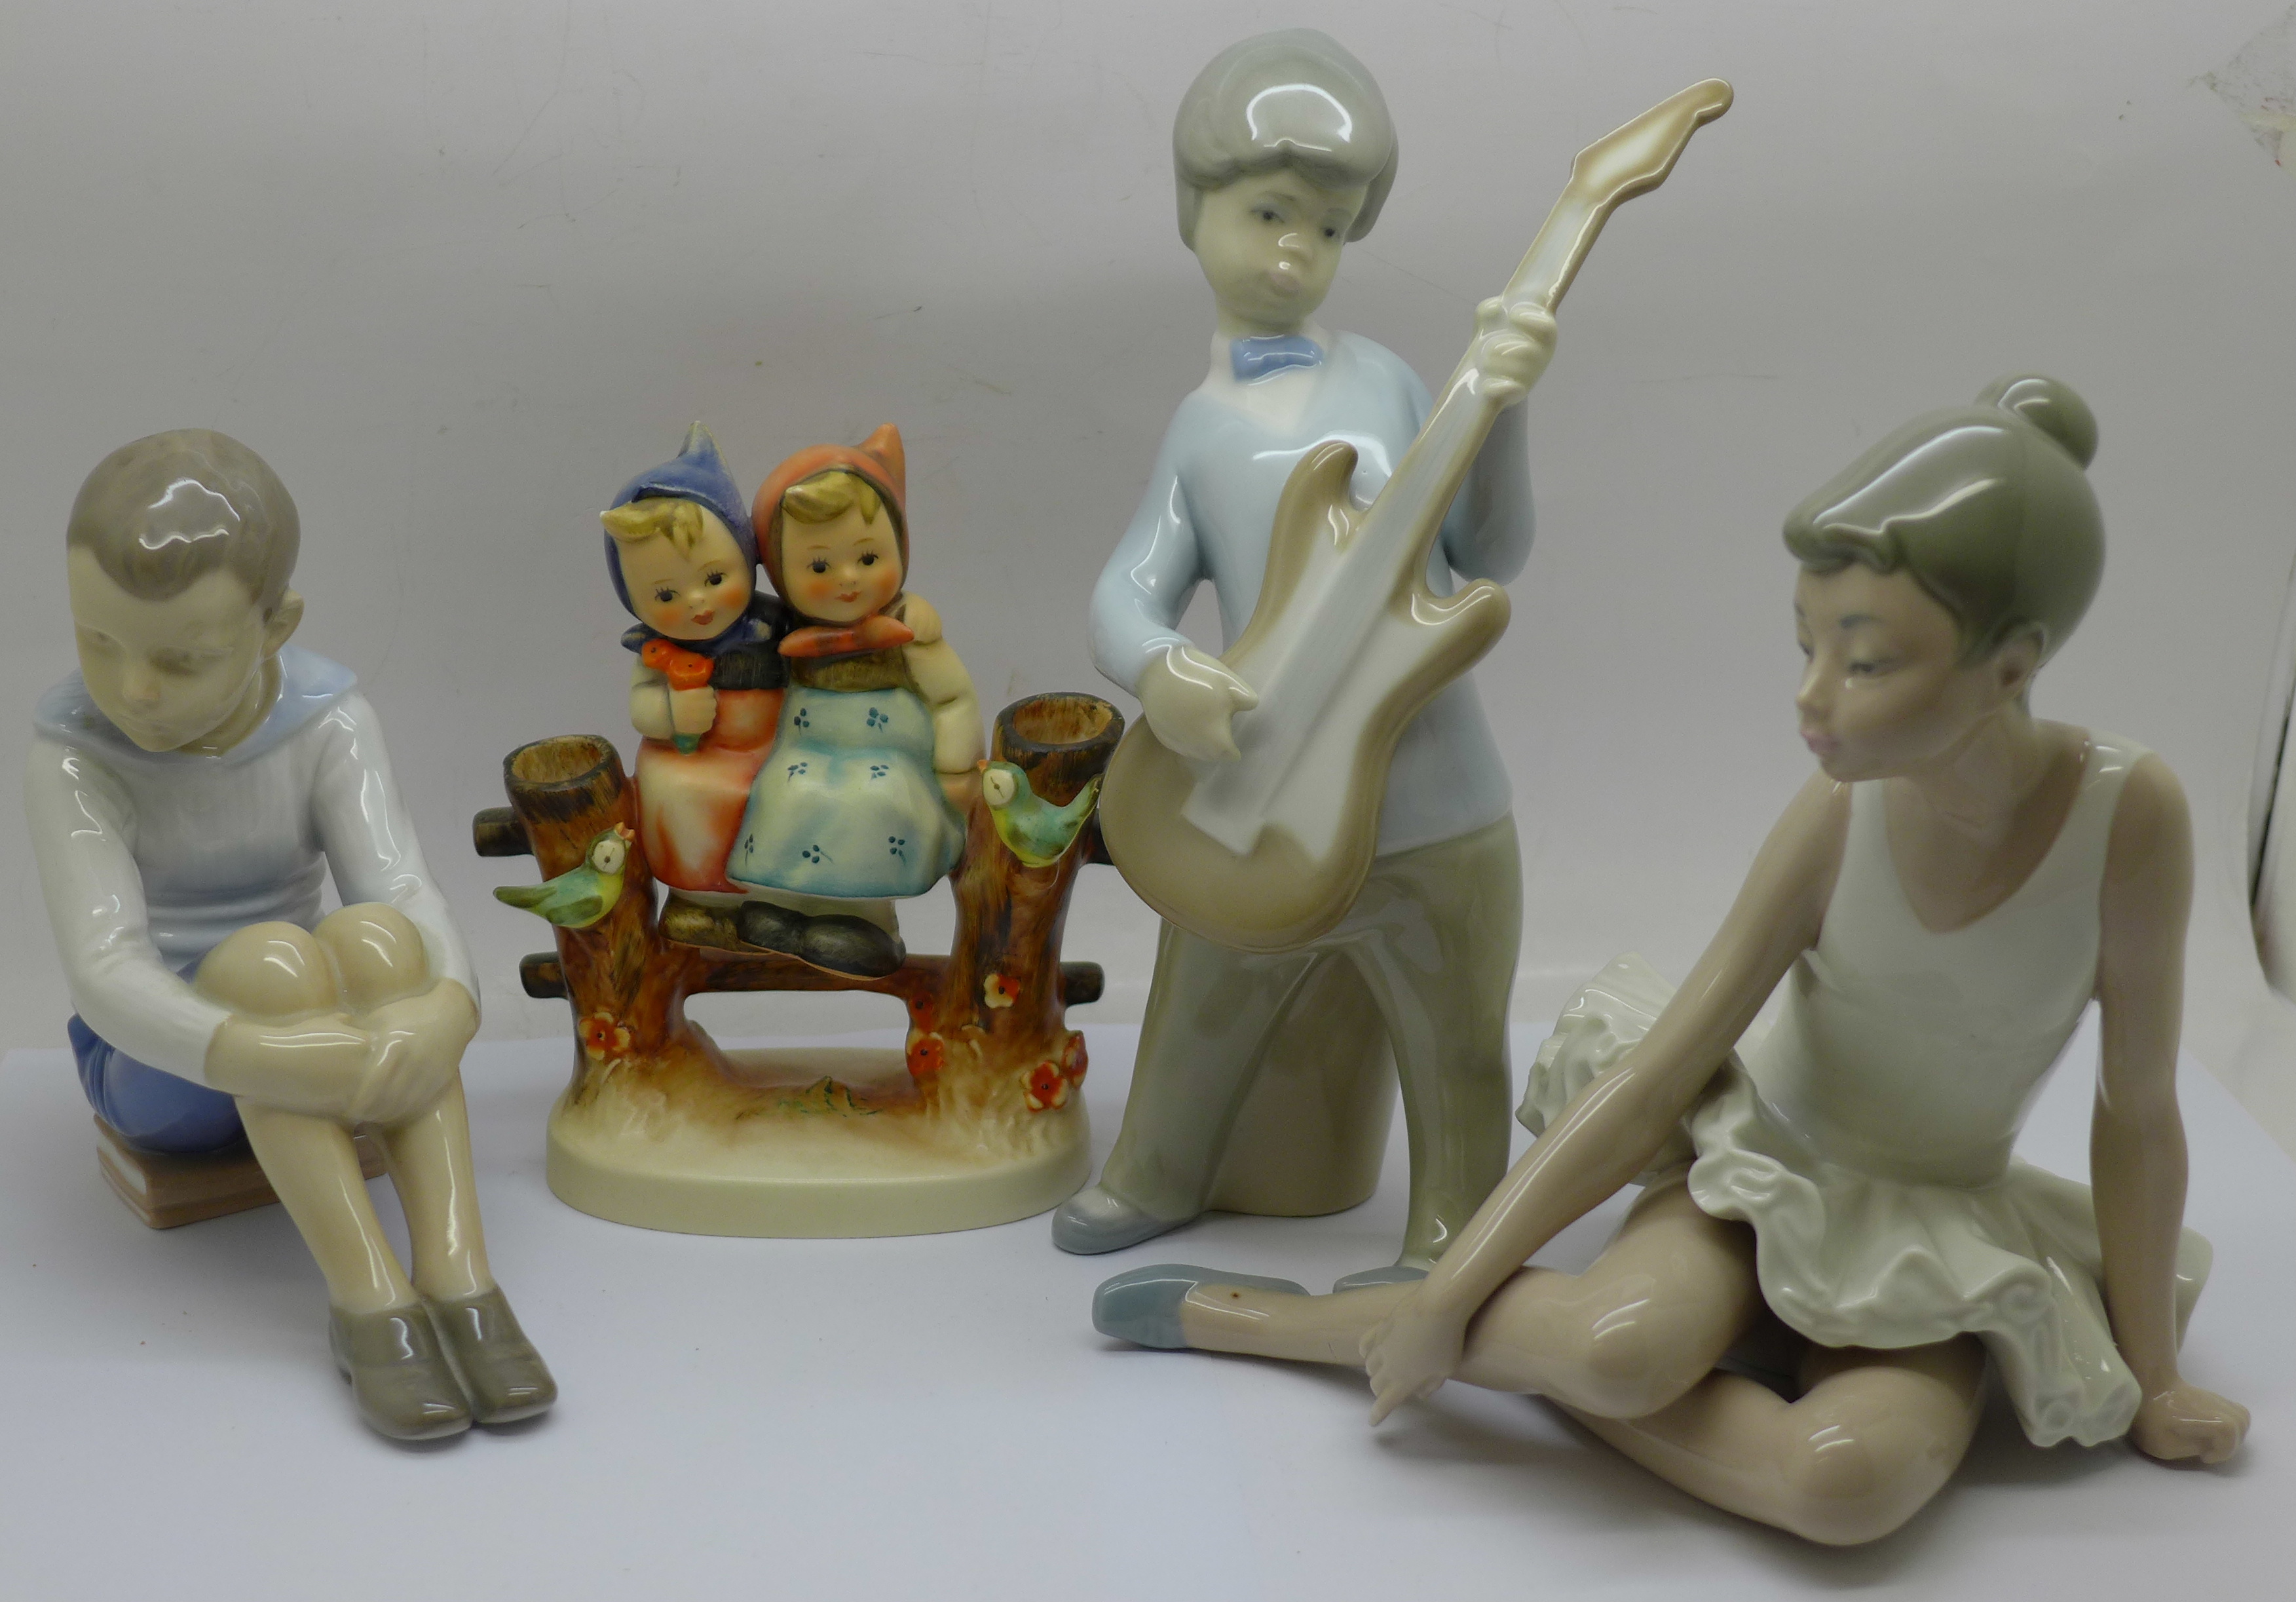 Four figures, B&G Denmark, Lladro, Nao and Hummel, Hummel figure a/f (small chip on one head)